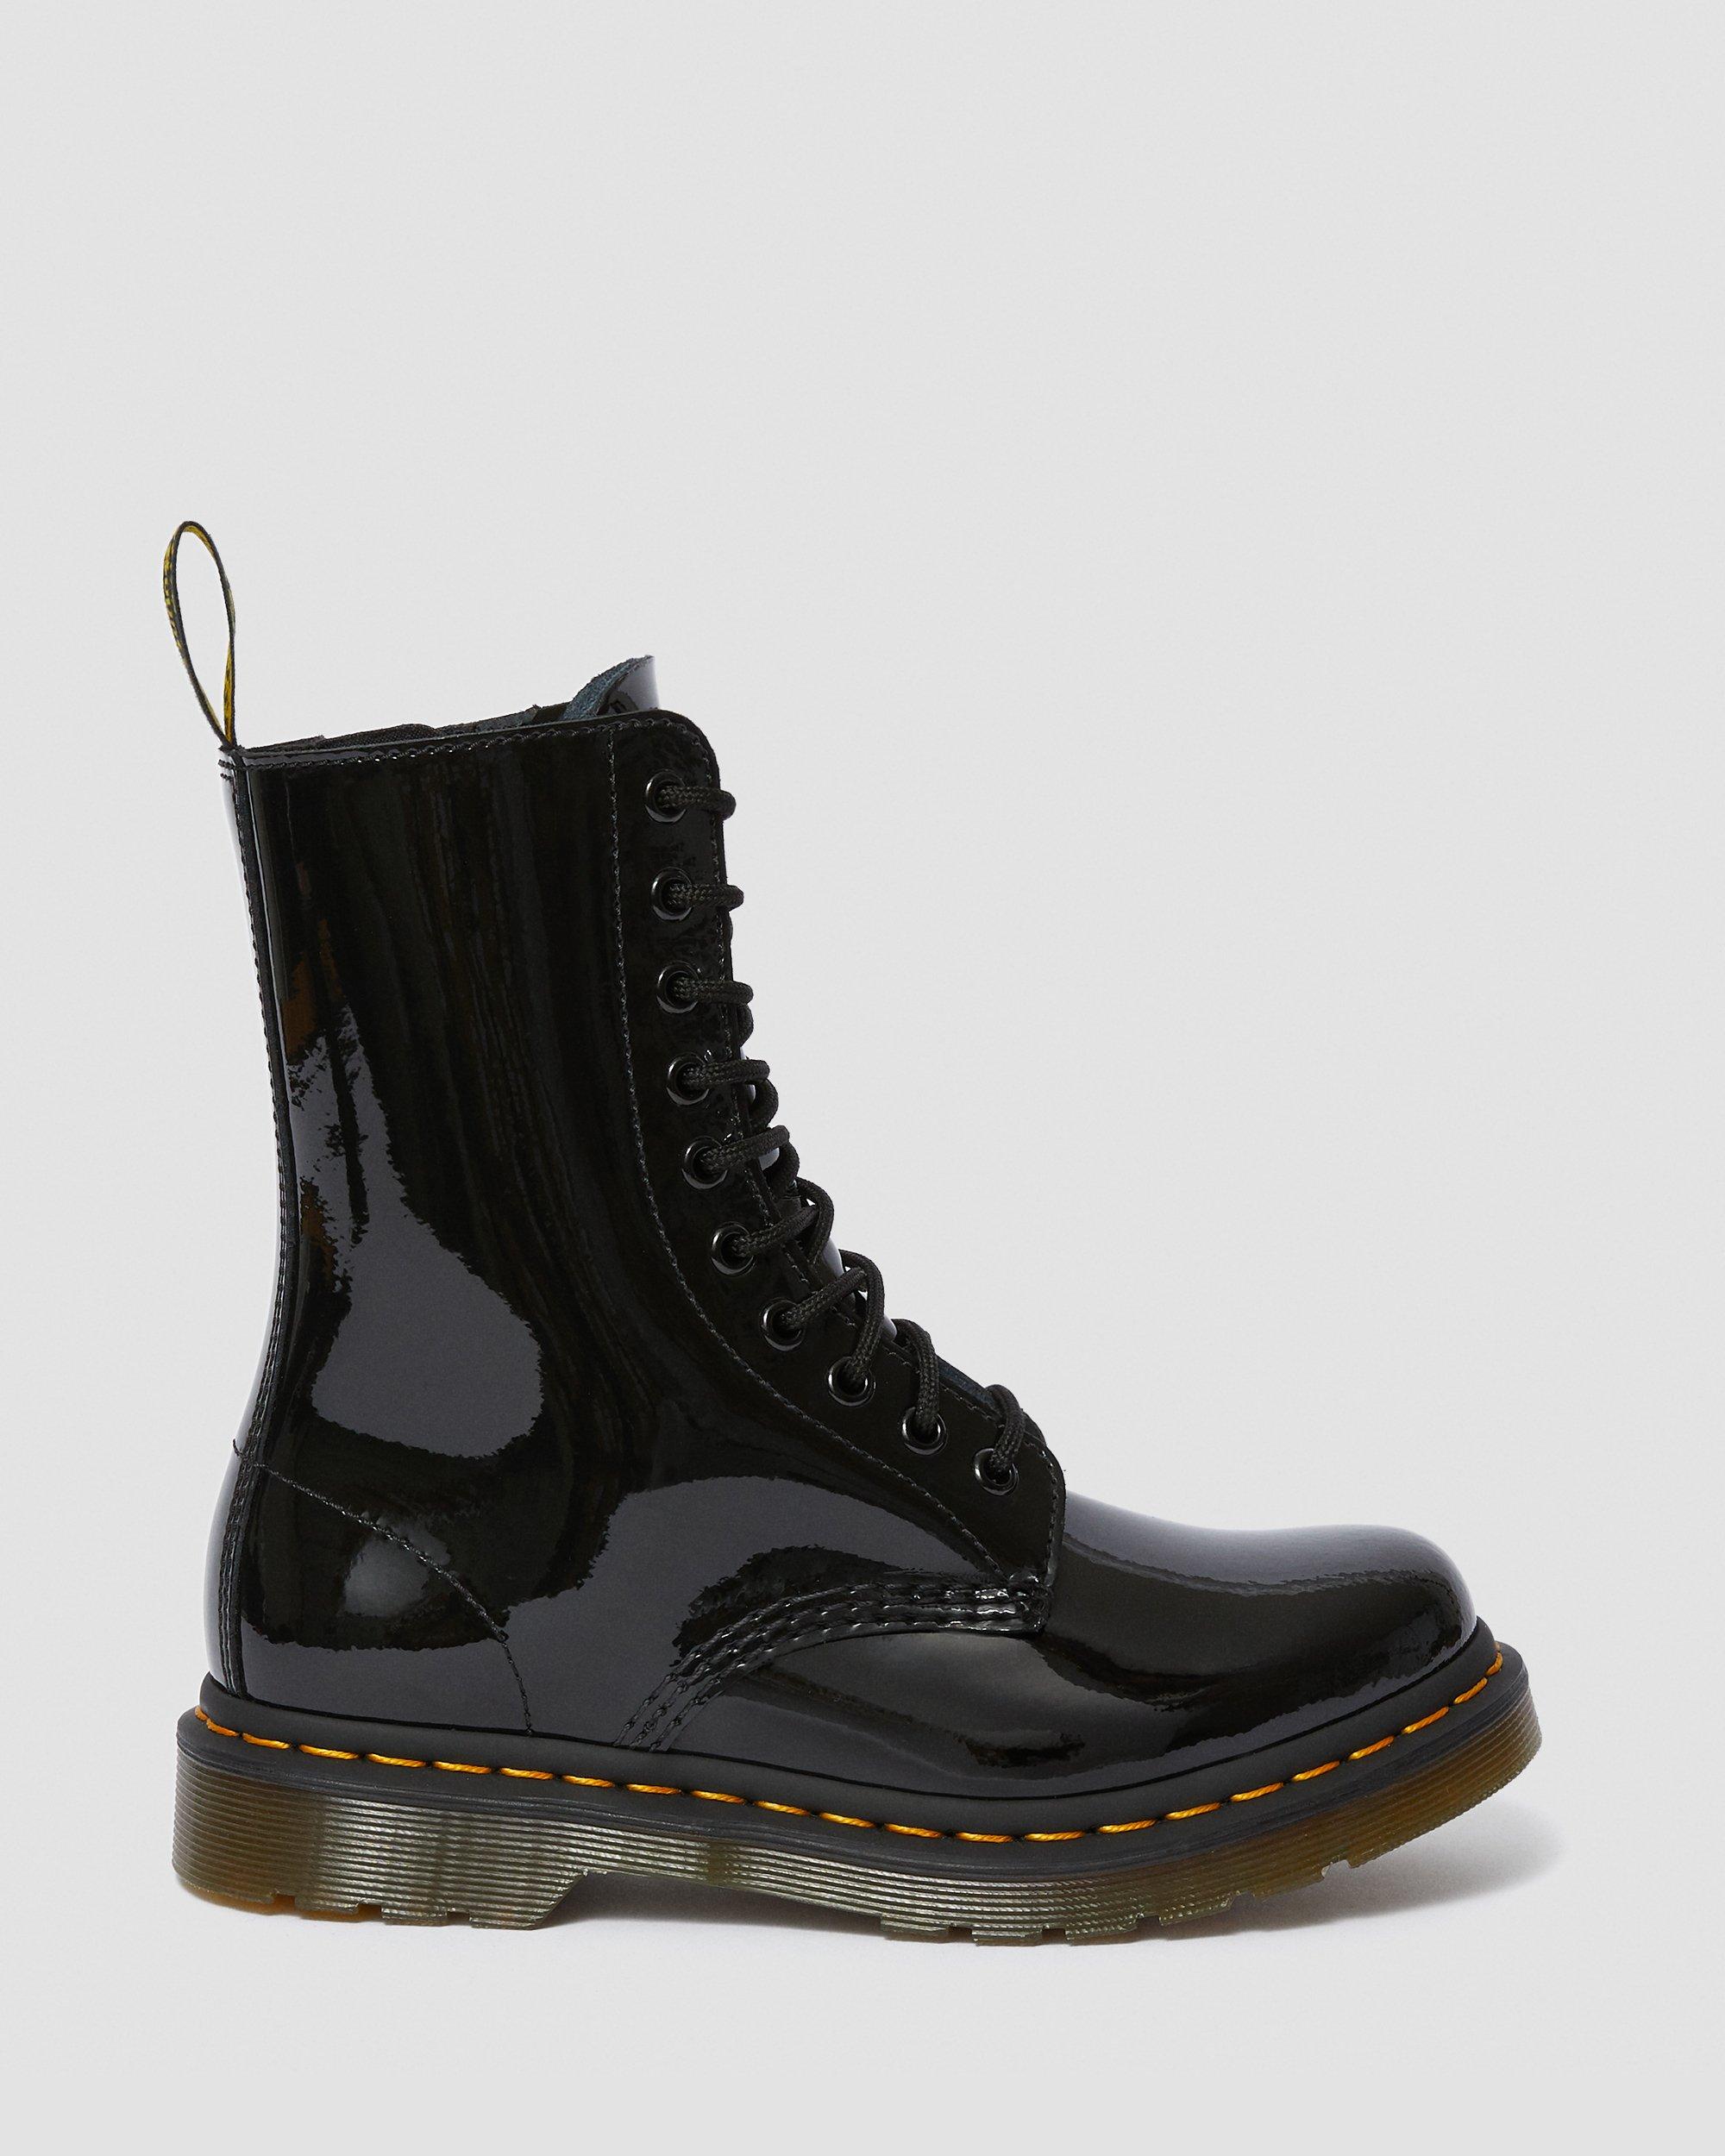 DR MARTENS 1490 Women's Patent Leather Mid Calf Boots